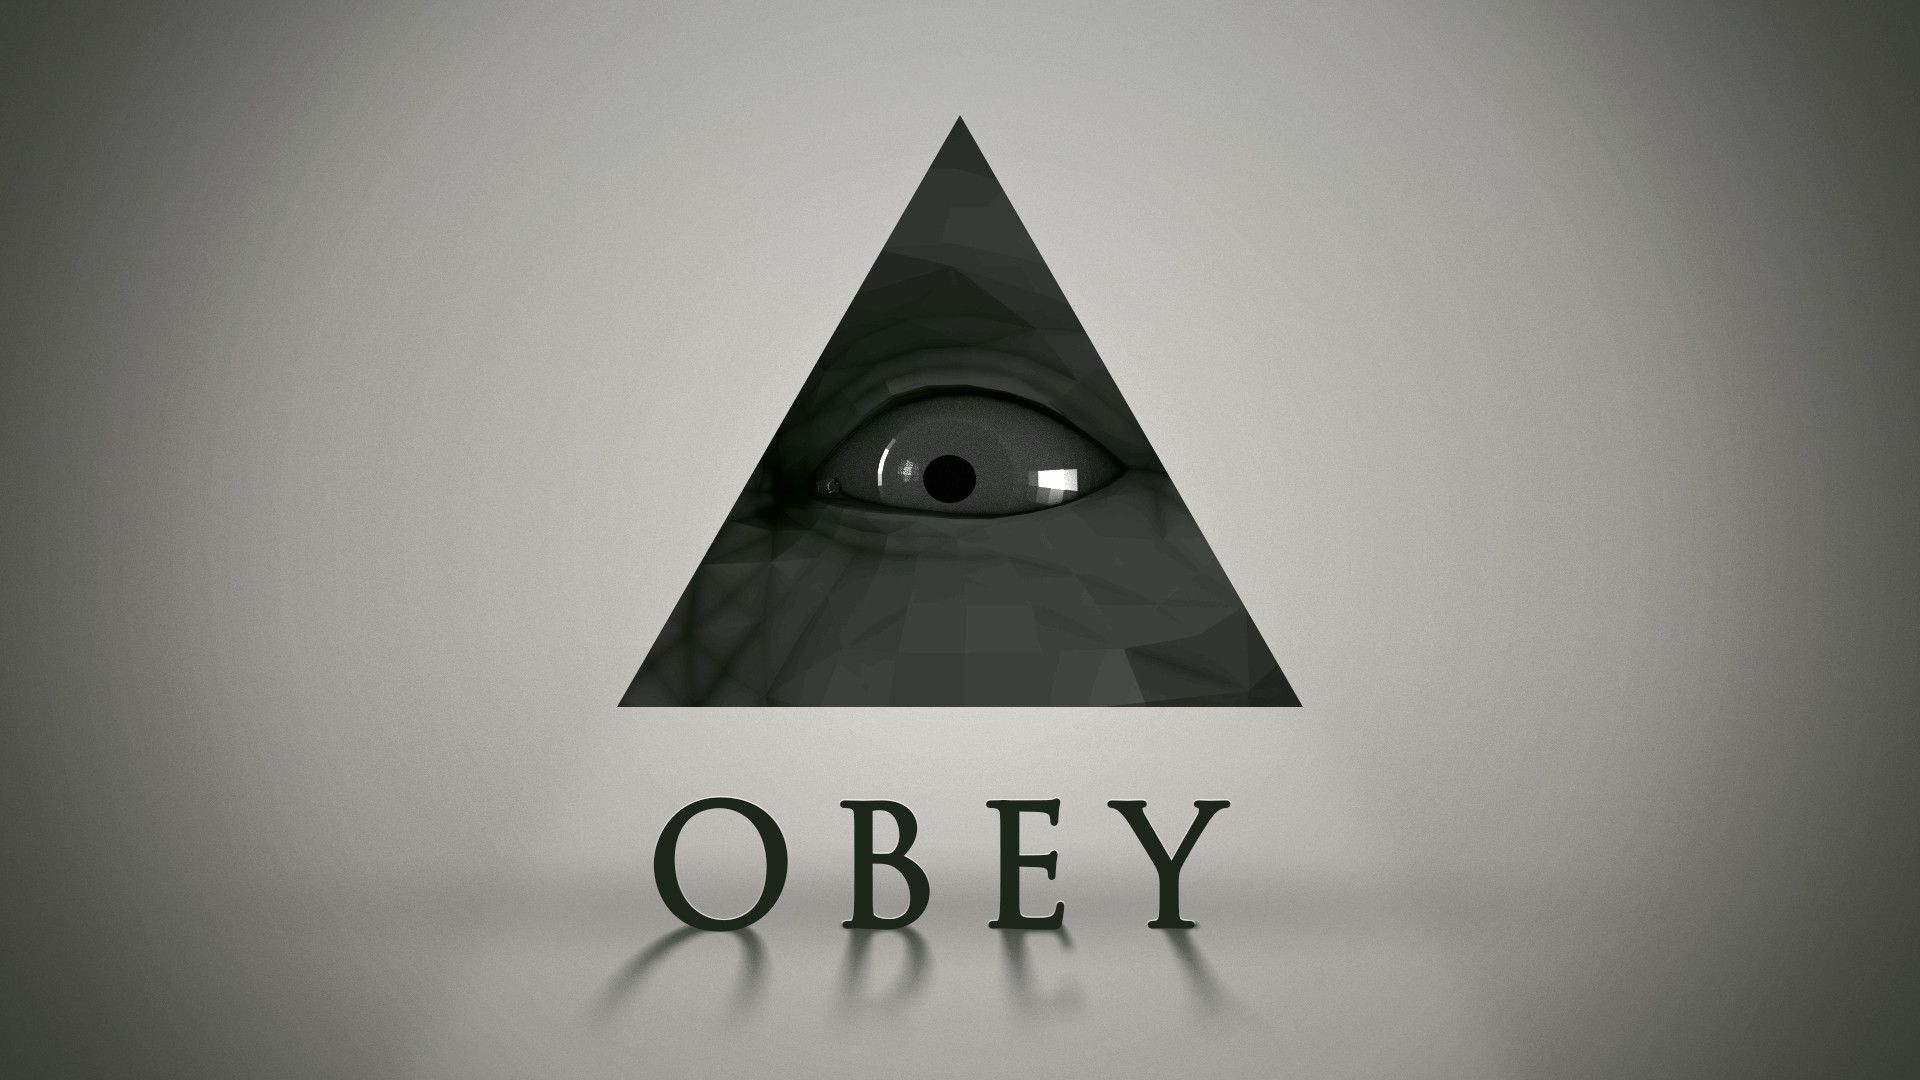 Obey. [1920x1080] (OC) : wallpapers